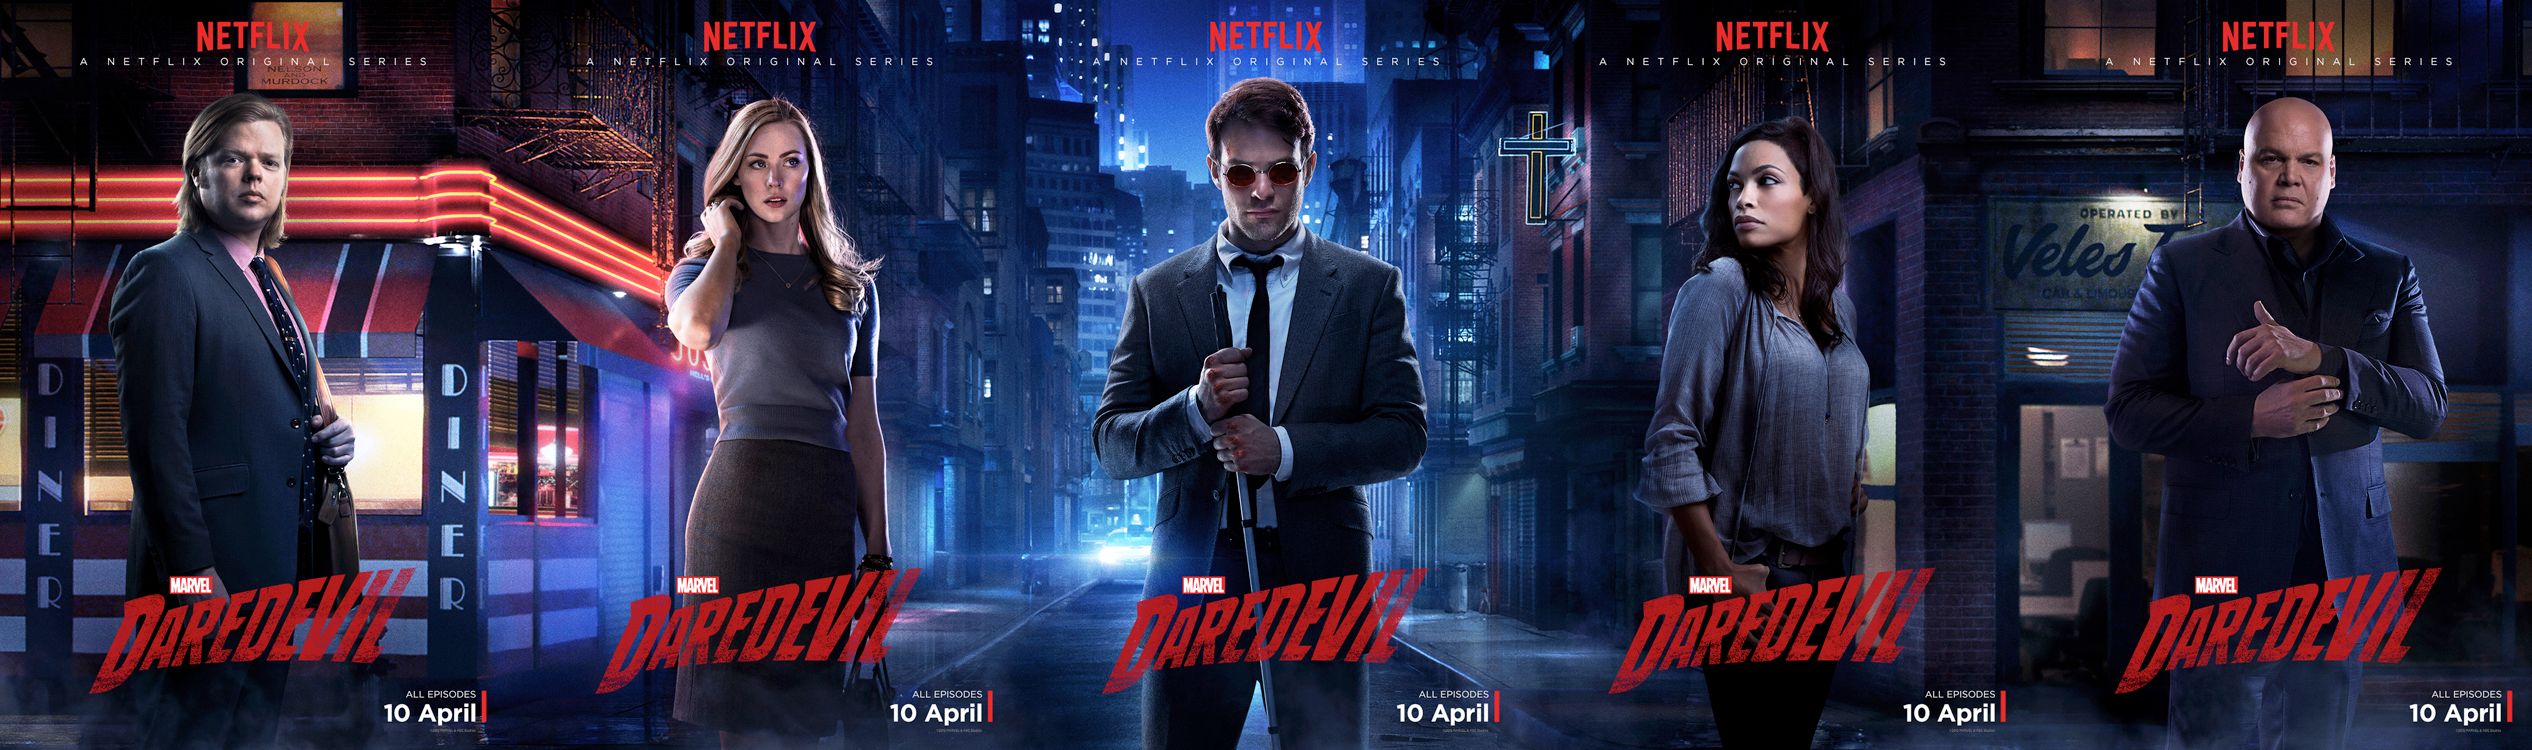 Marvel's Daredevil Combined Character Poster